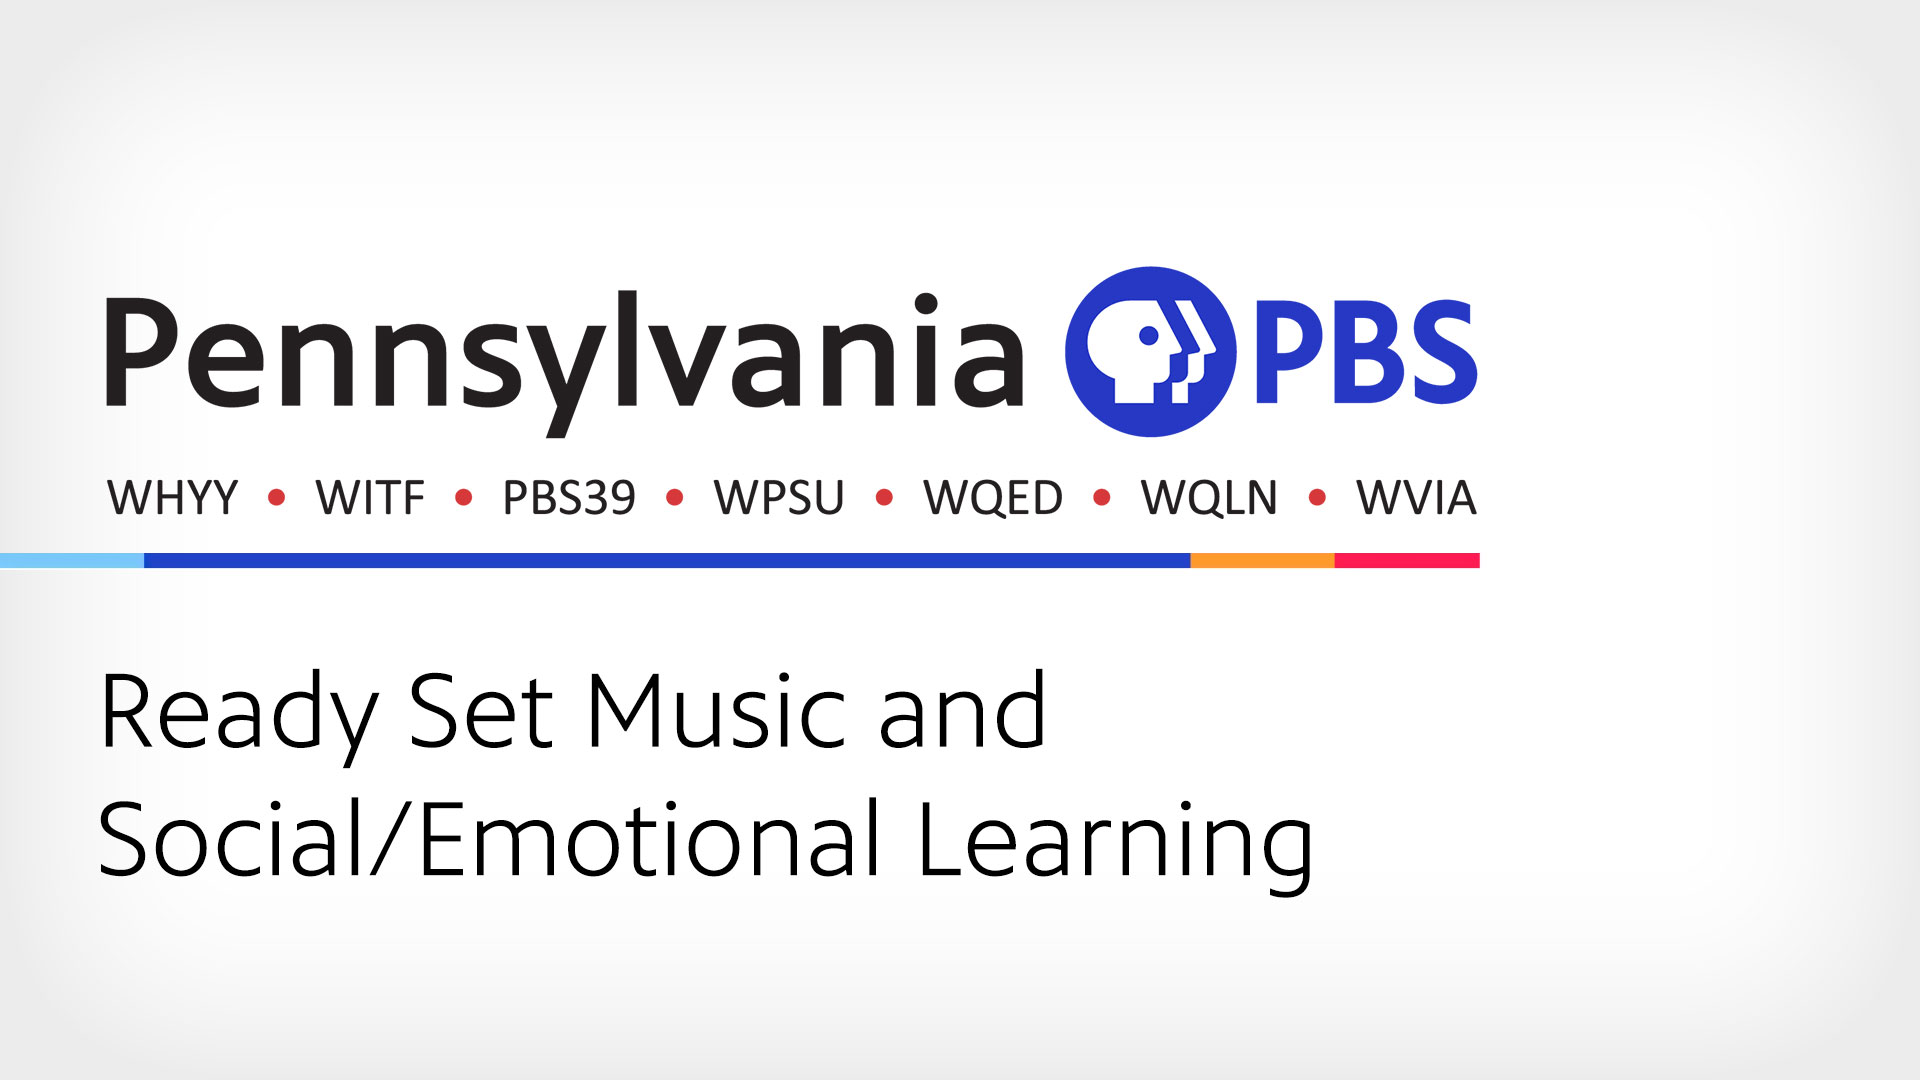 Ready Set Music and Social/Emotional Learning